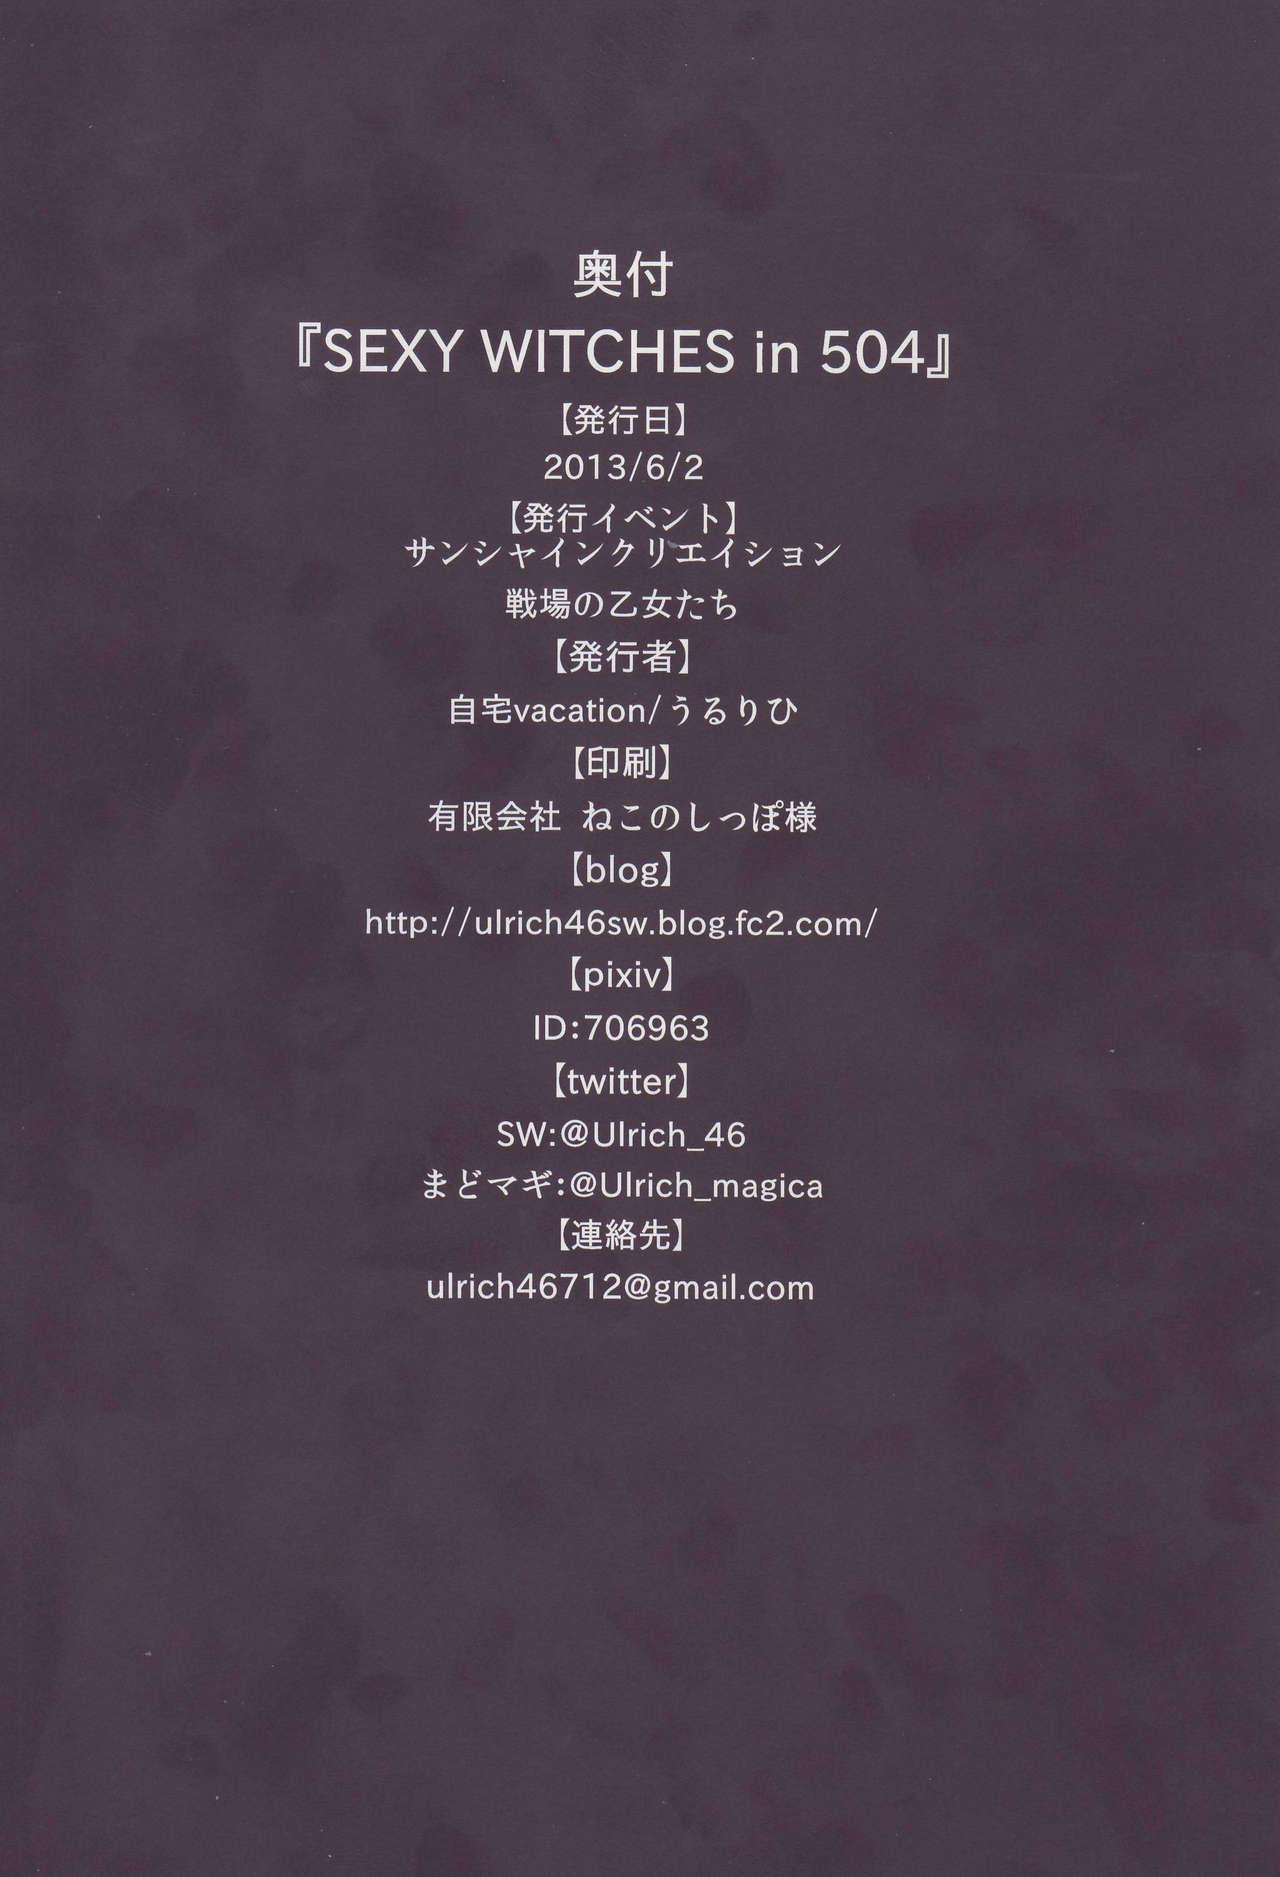 Sexy Witches in 504 16